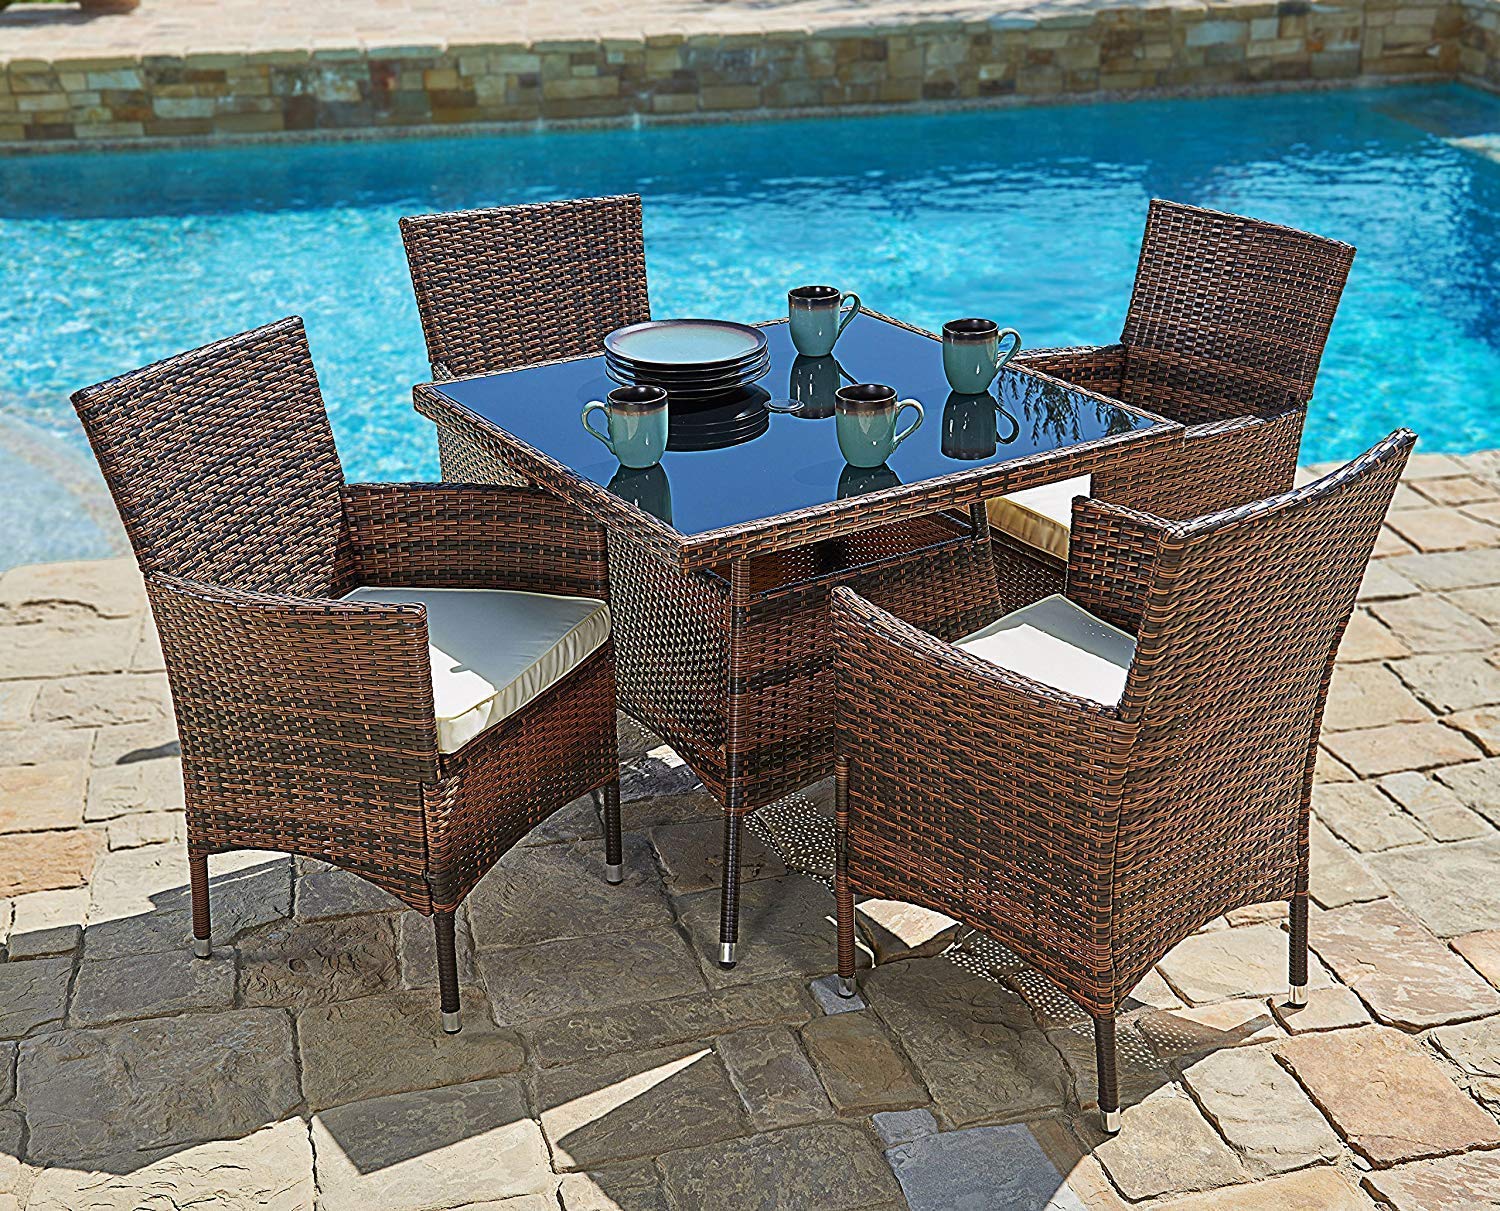 SUNCROWN Outdoor Furniture All-Weather Square Wicker Dining Table and Chairs for 4 (5-Piece Set) Washable Cushions, Patio, Backyard, Porch, Garden, Poolside, Tempered Glass Tabletop, Modern Design - image 1 of 6